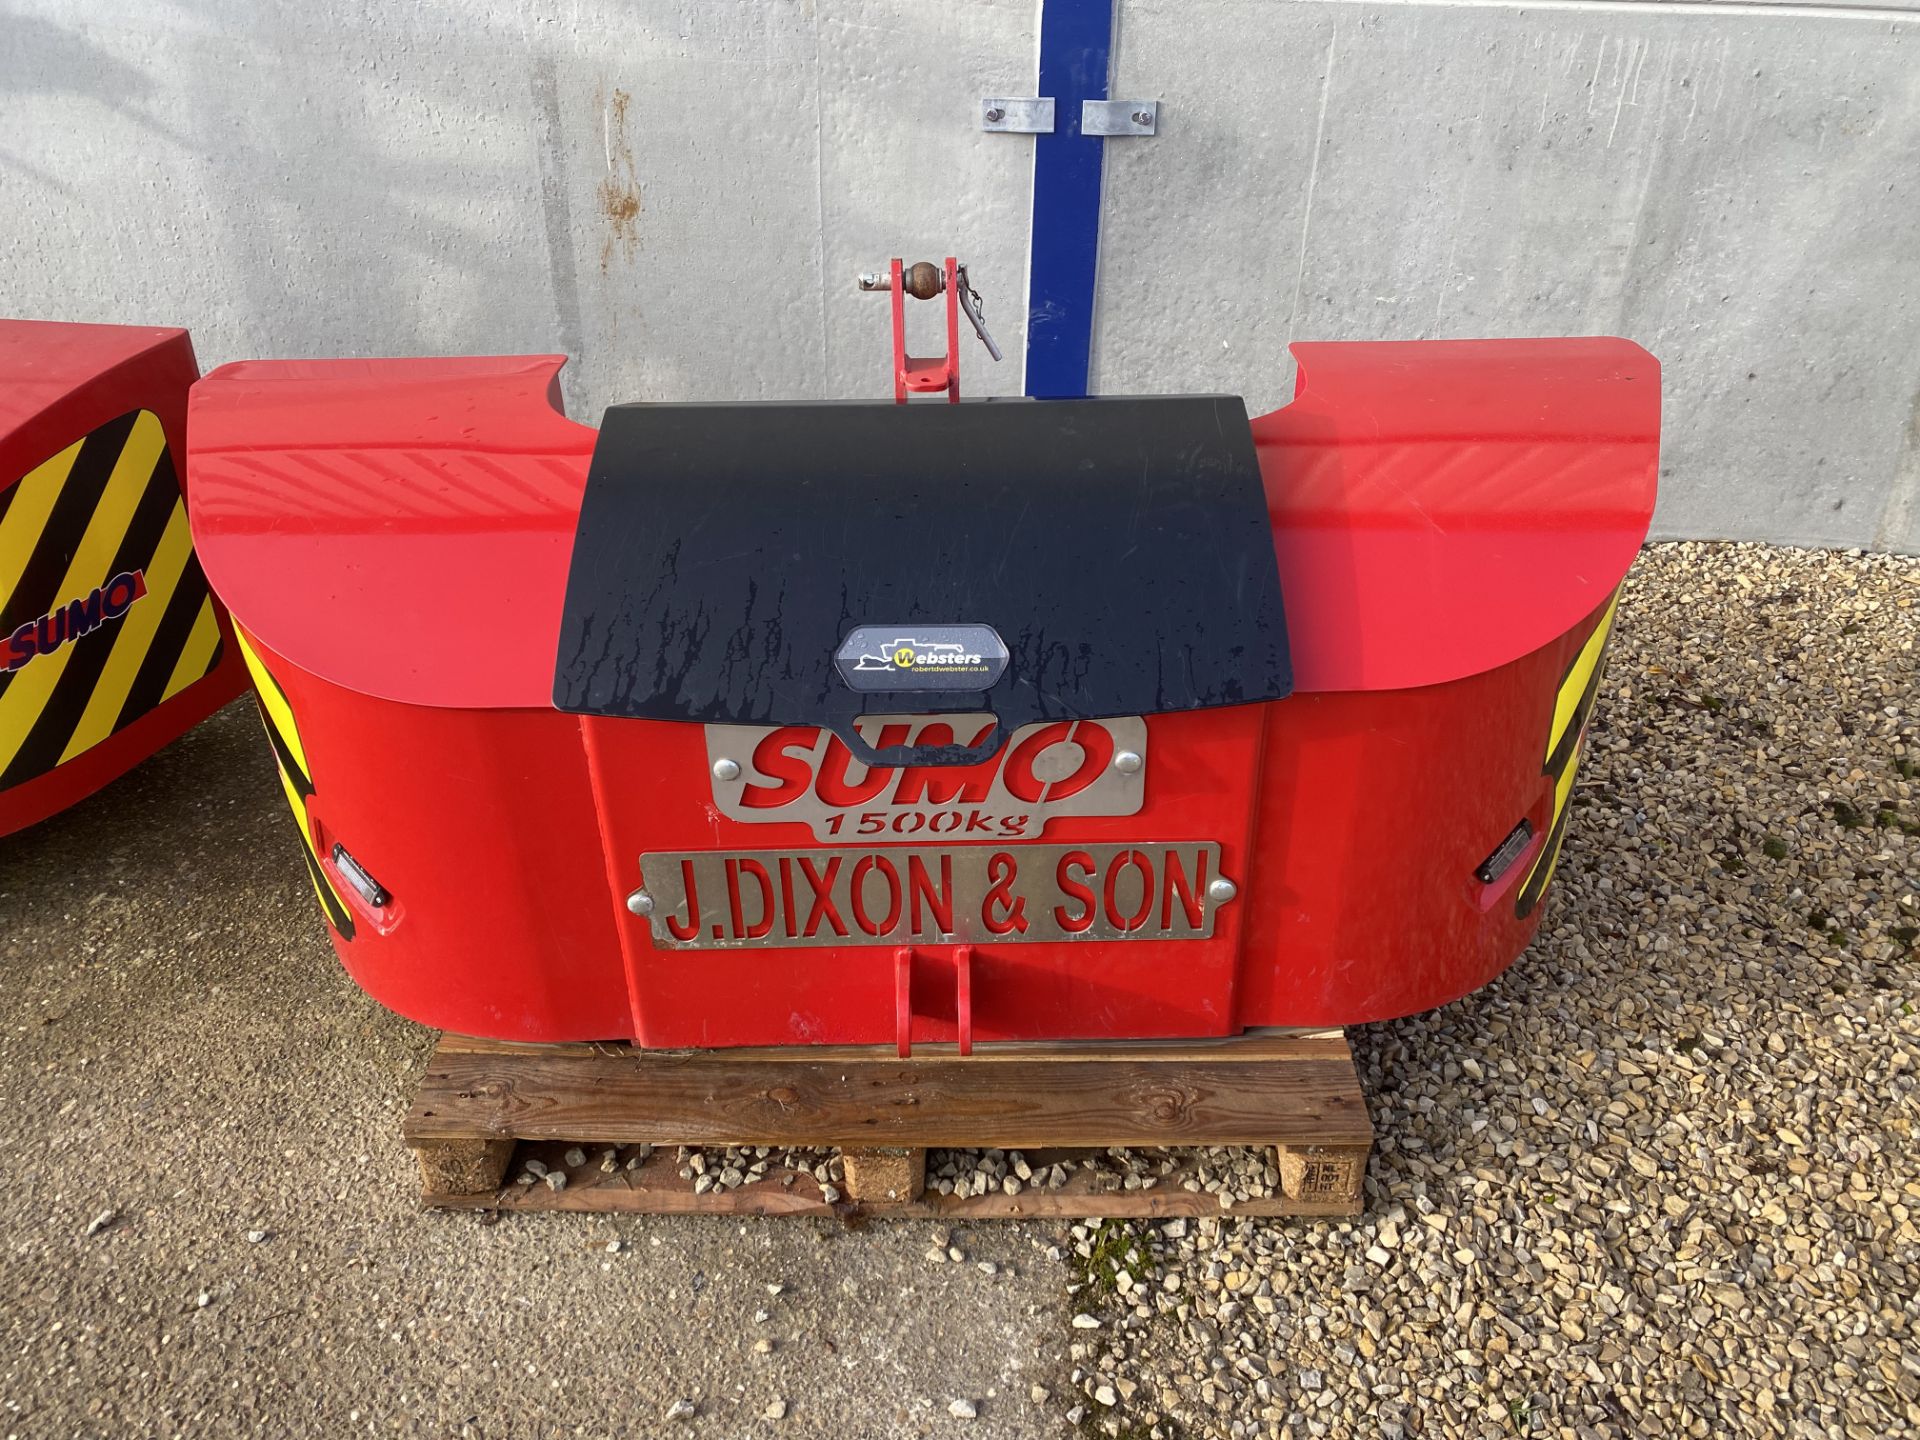 2019 Sumo 1500kgs front mounted Weight Block c/w tool box (to fit the above)